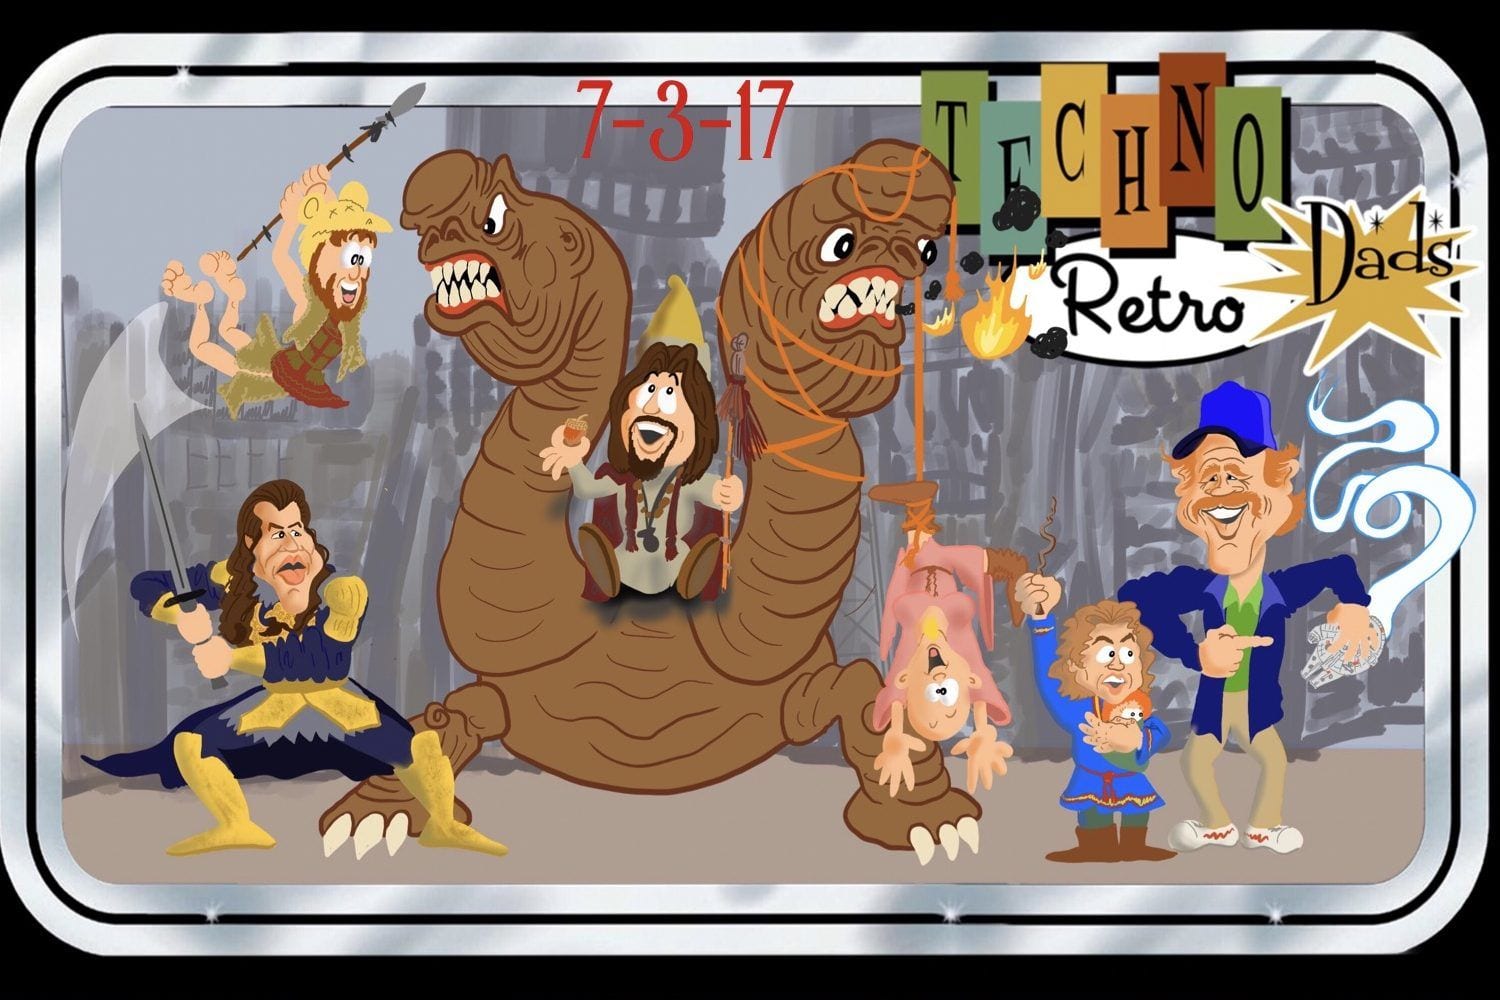 TechnoRetro Dads: Willow Director Ron Howard Ready to Helm Star Wars Han Solo Movie